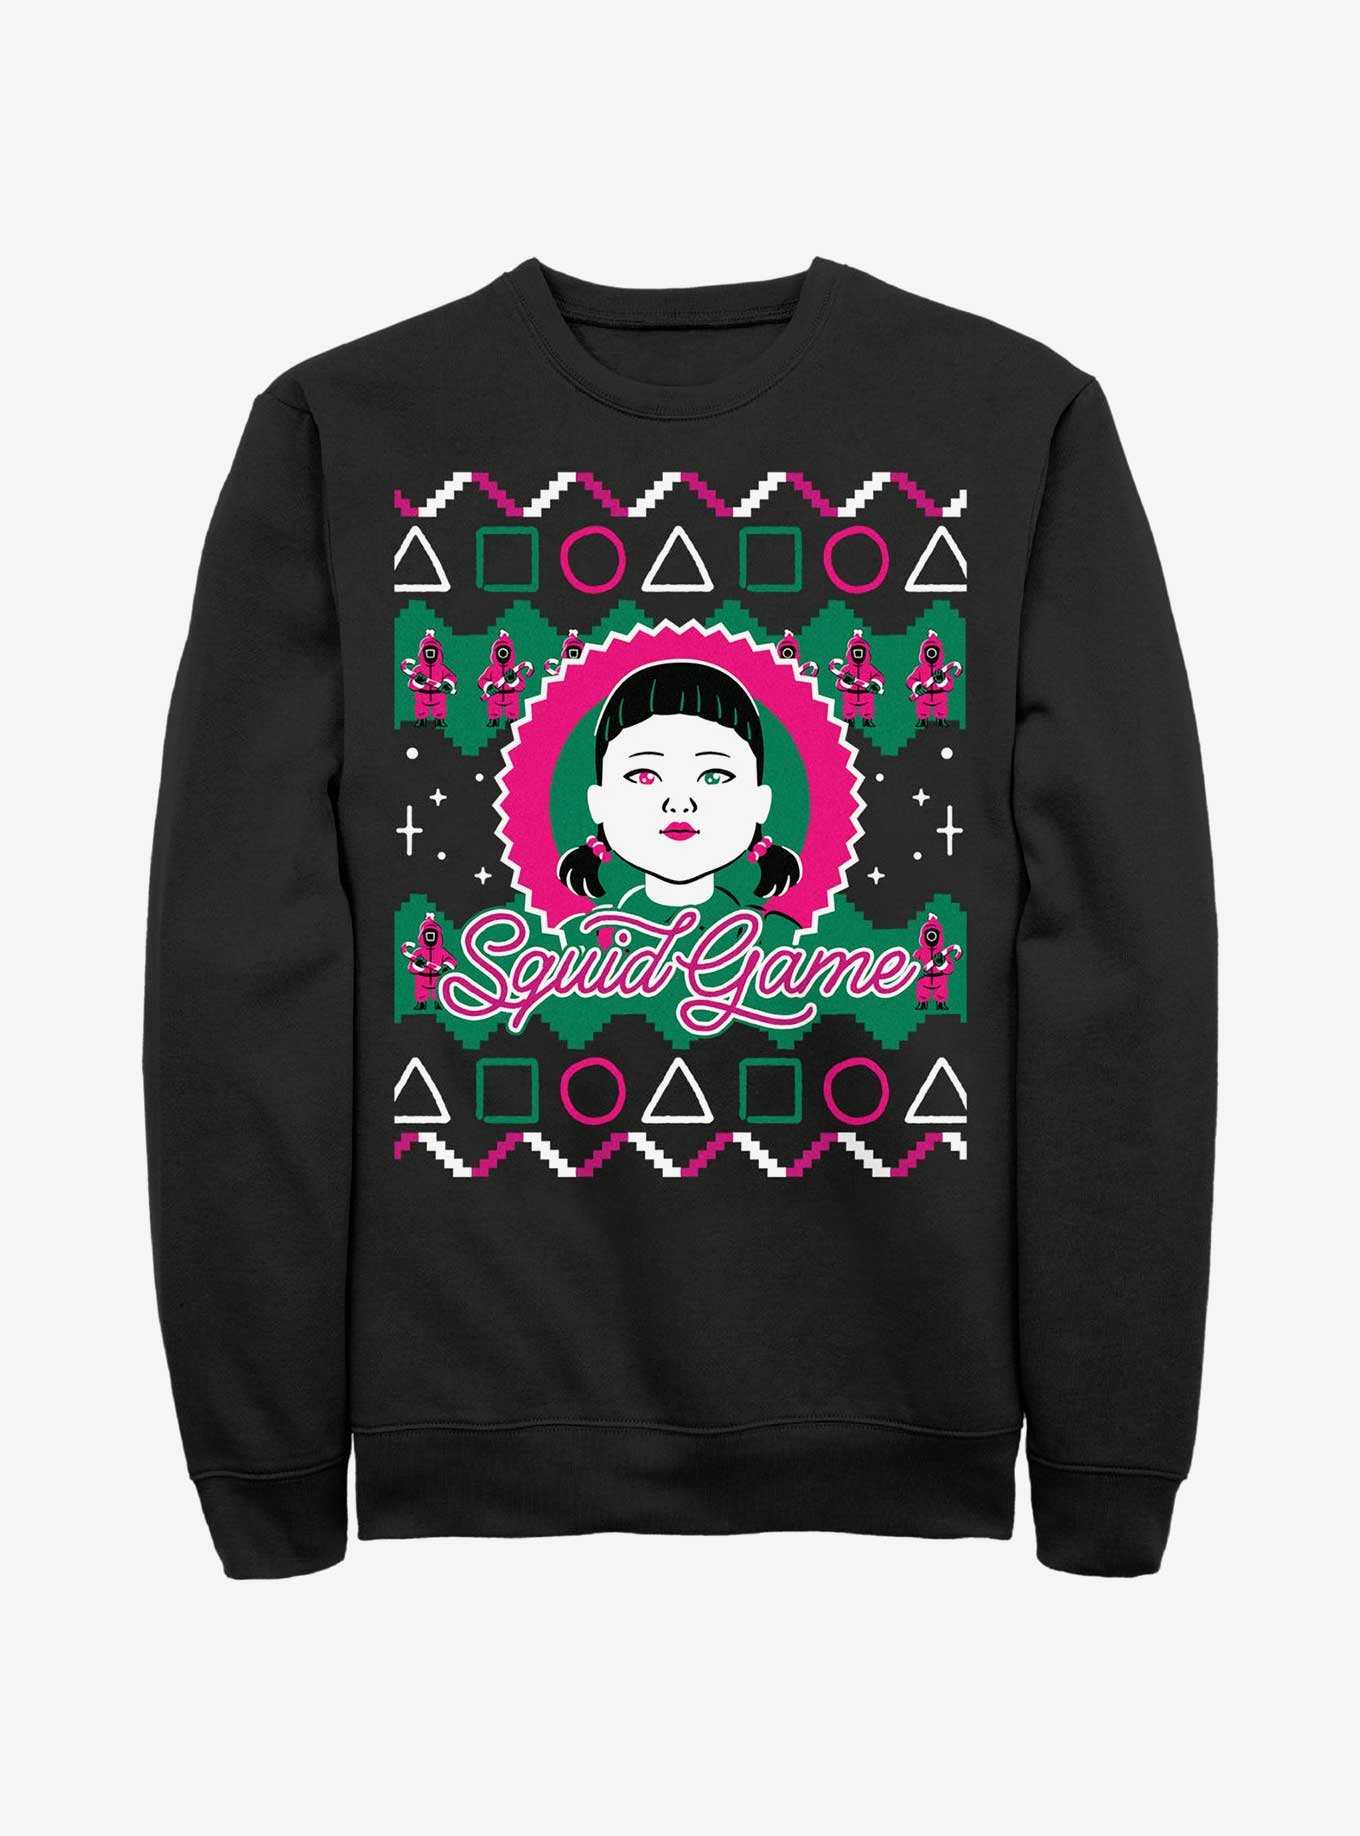 Squid Game Young-Hee Doll Ugly Christmas Sweatshirt, , hi-res